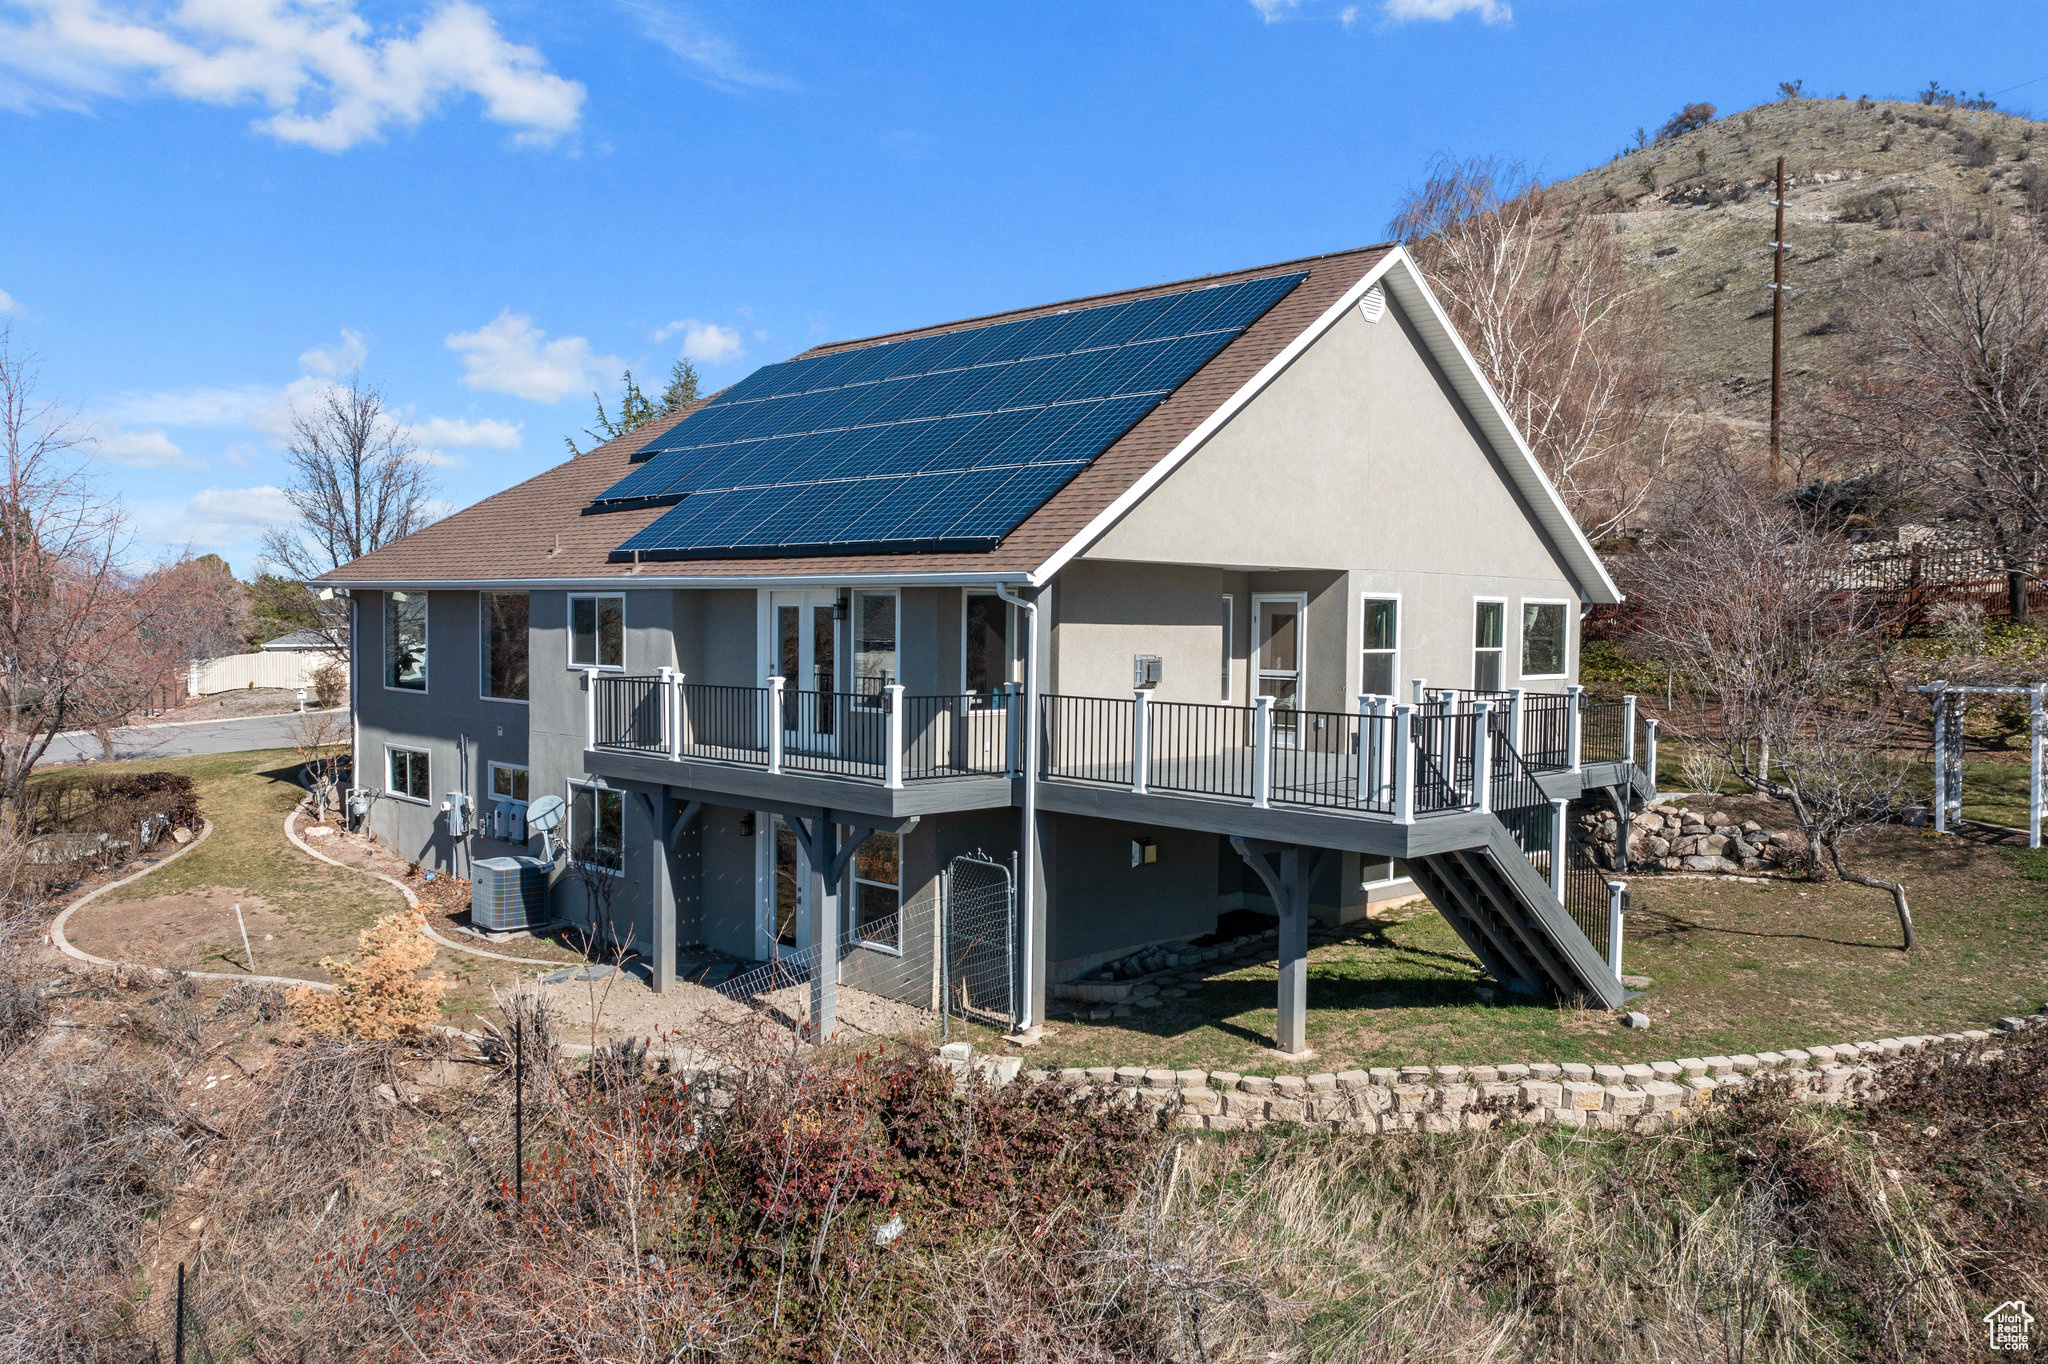 Back of property, a wooden deck, and solar panels